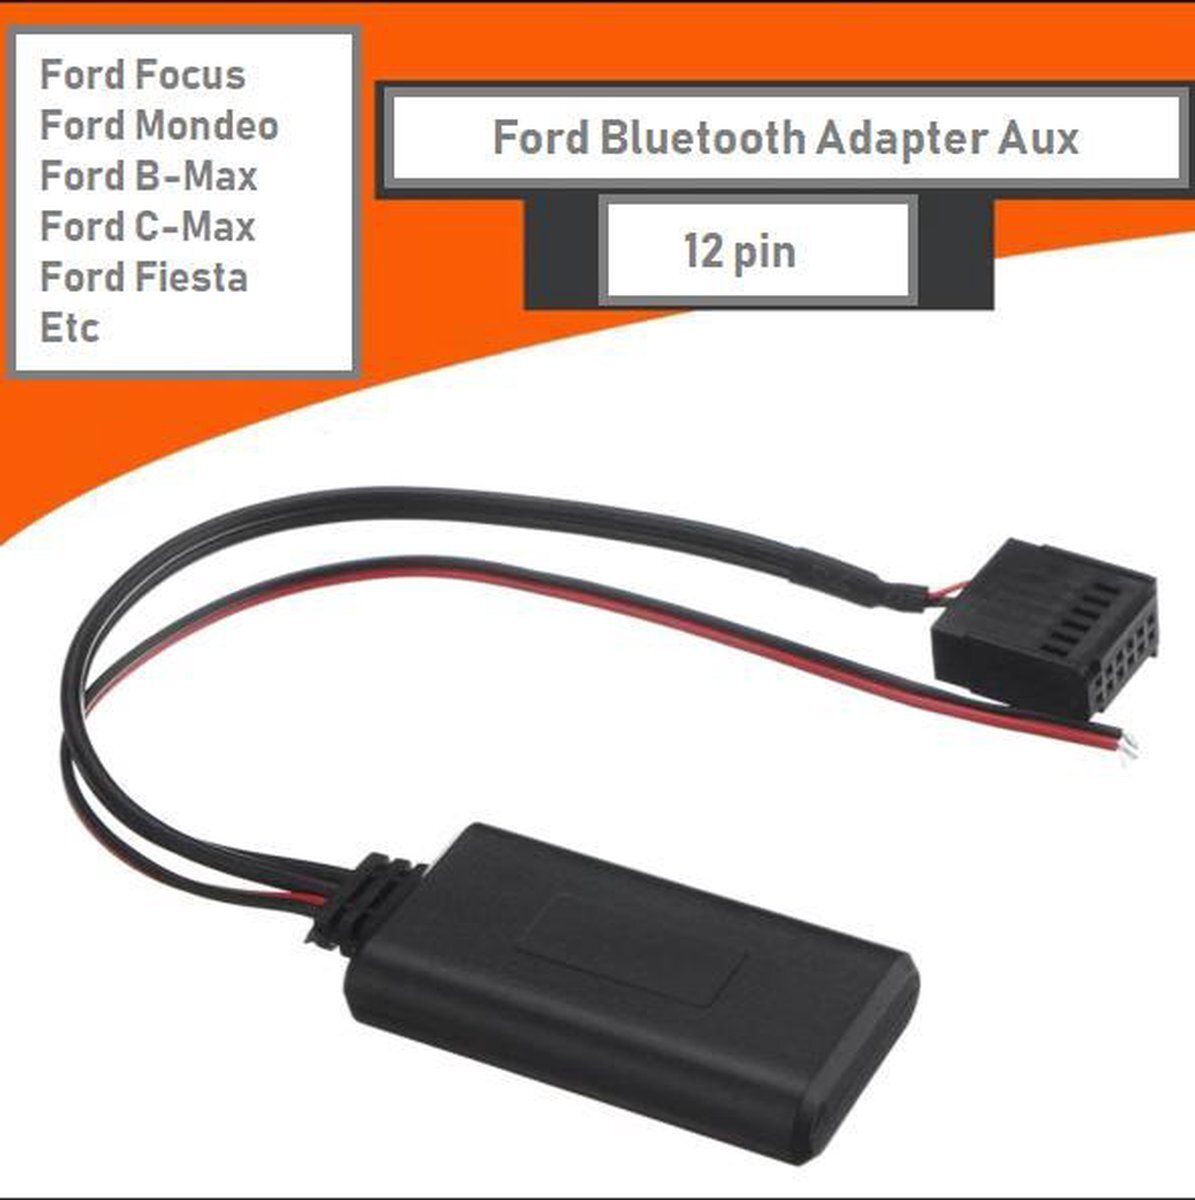 No Name Ford Focus Bluetooth Audio Streaming Adapter Aux Module Wagon Cd 6000 Cd6000 Cd6006 Focus Rs Gt